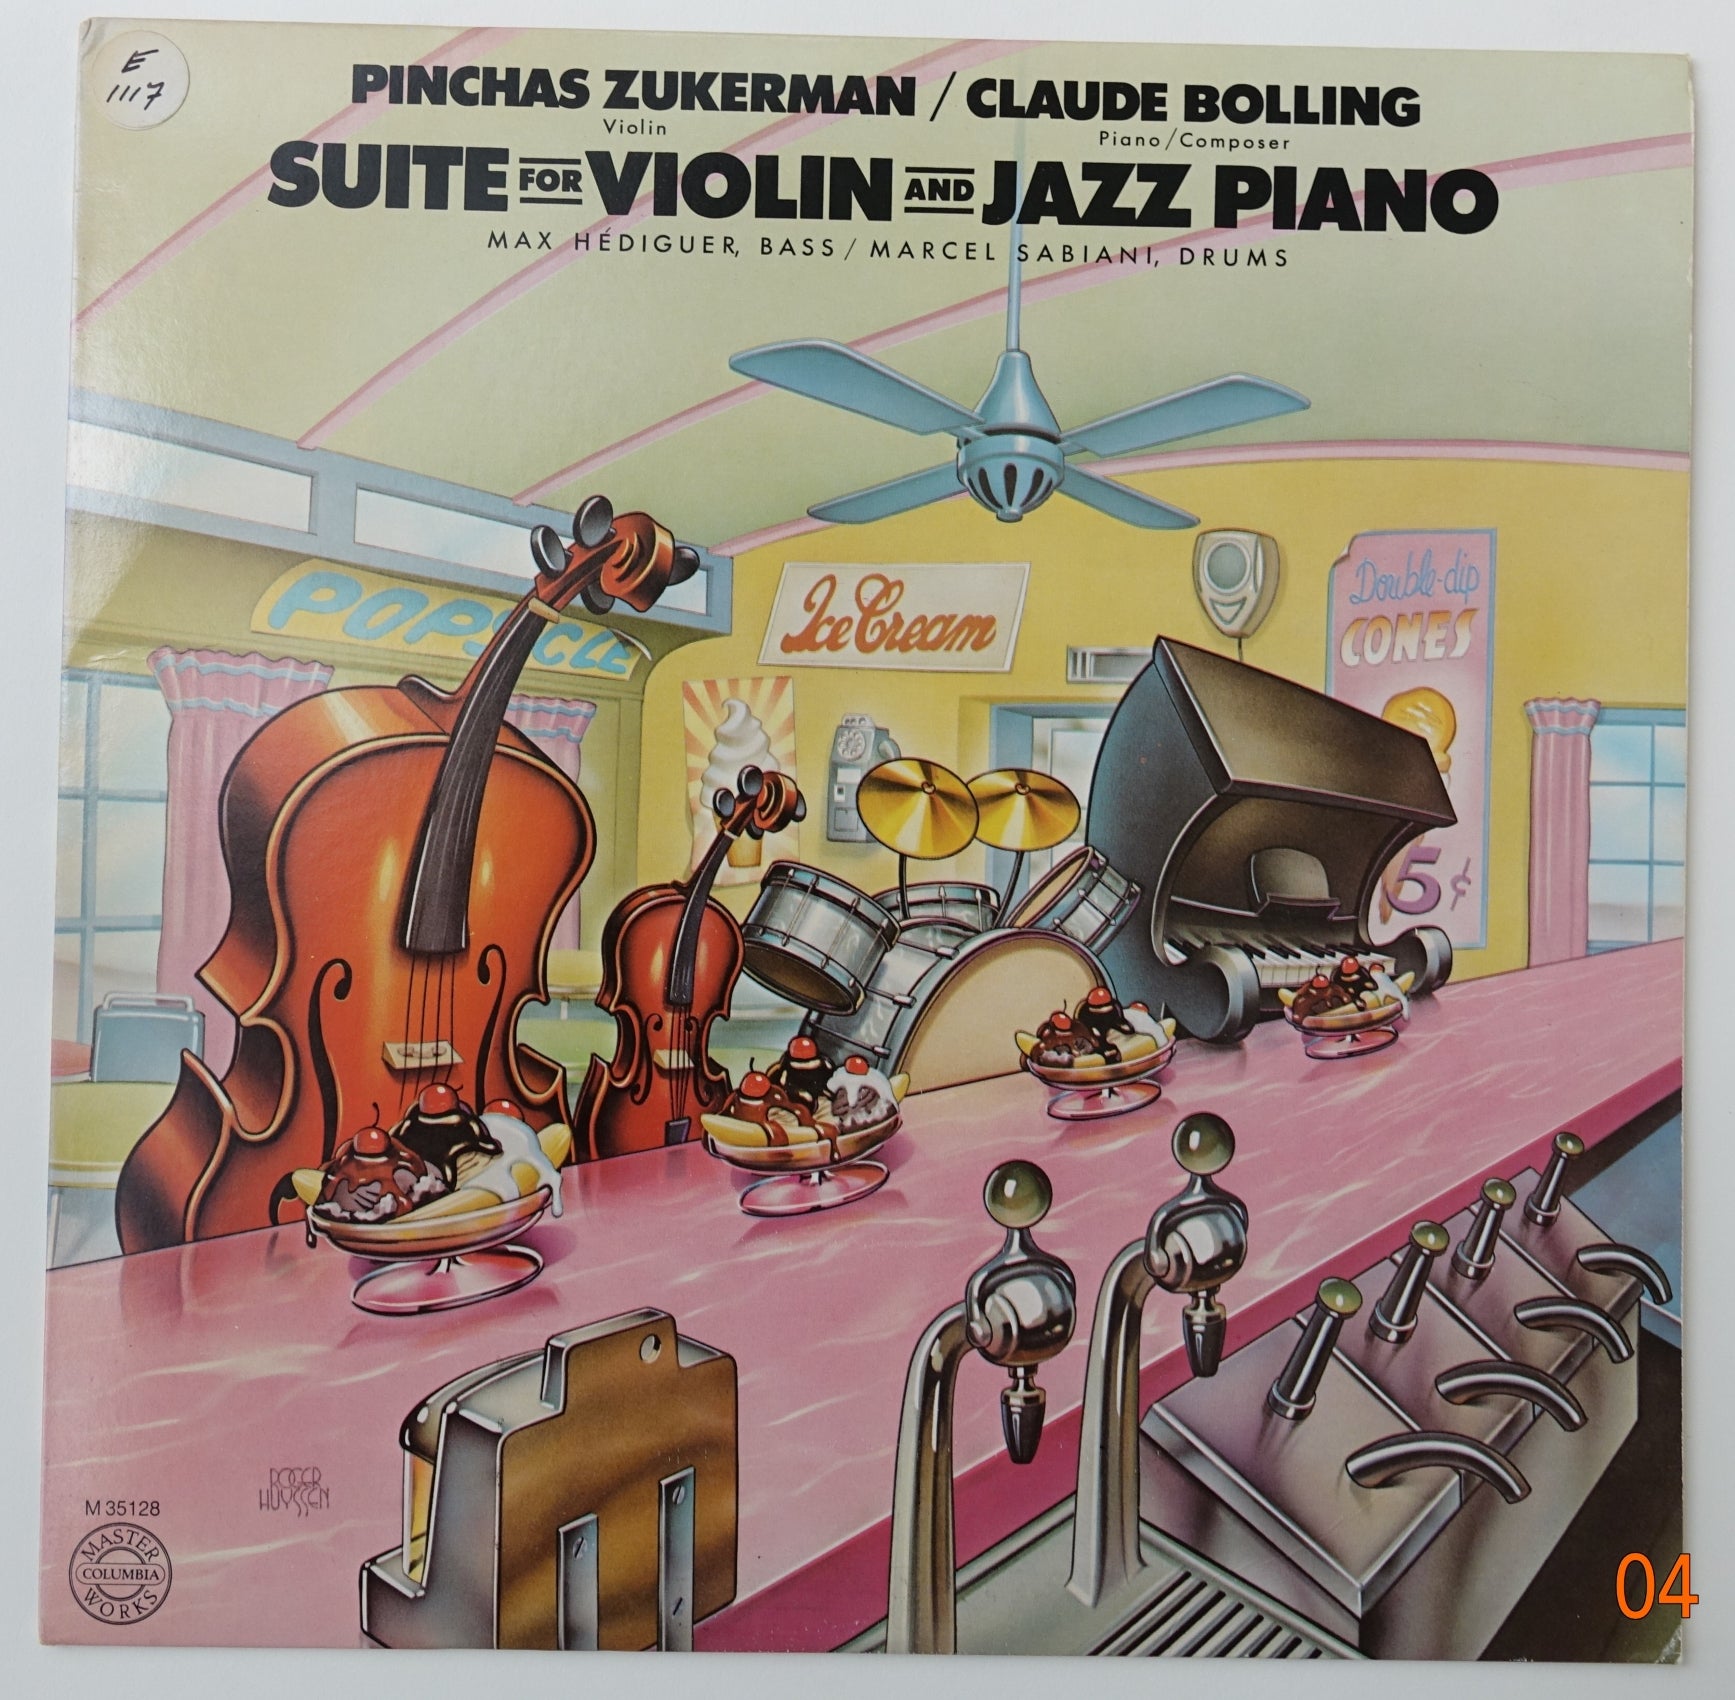 CBS014: Zukerman / Bolling - Suite for Violin and Jazz Piano